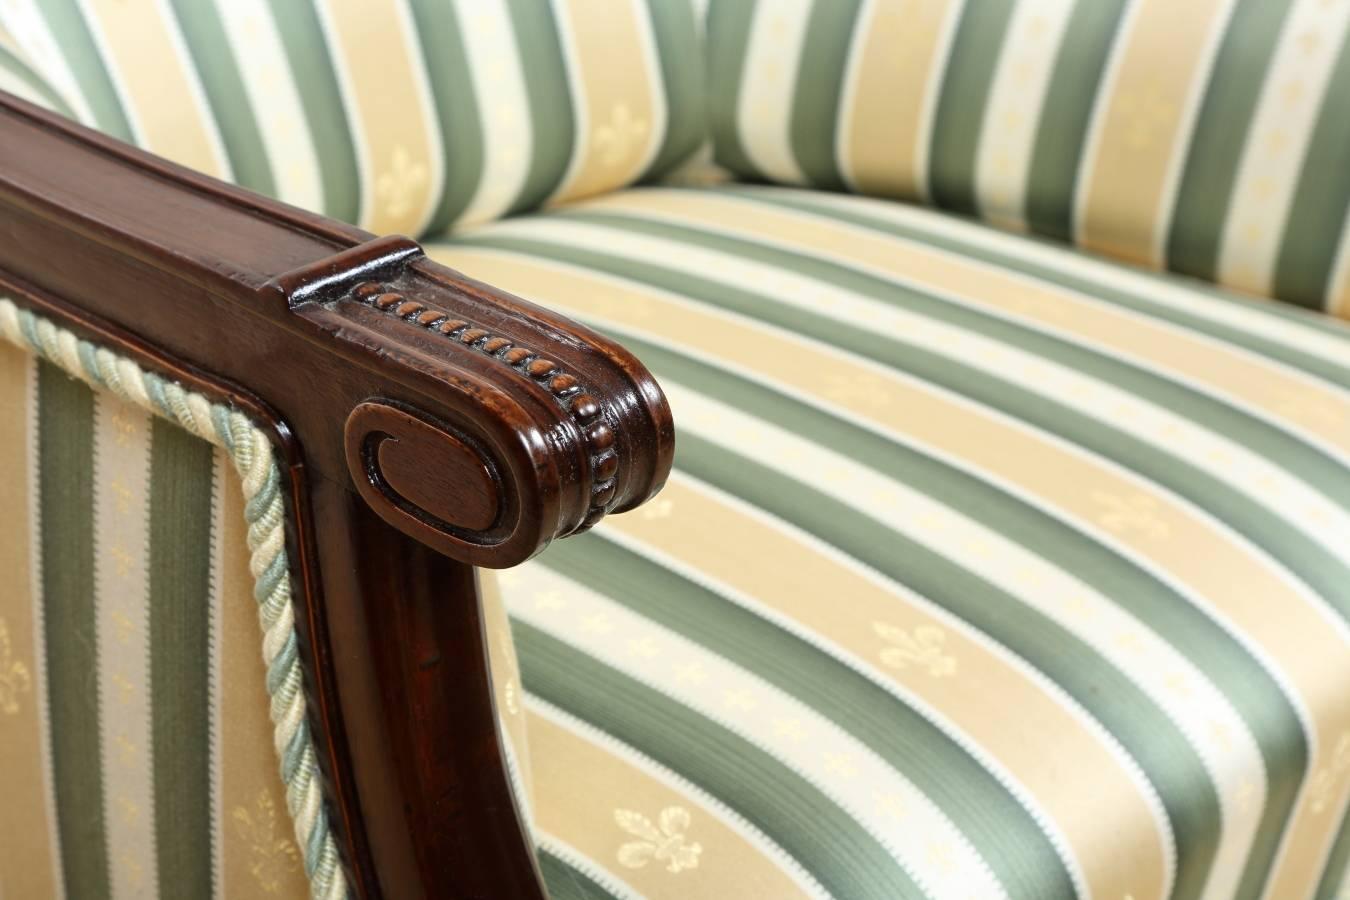 Louis Philippe walnut armchair, circa 1860 from France. Walnut frame has been restored with respect for original color and patina, and hand polished with natural shellac. The chair features new upholstery with coil springs.